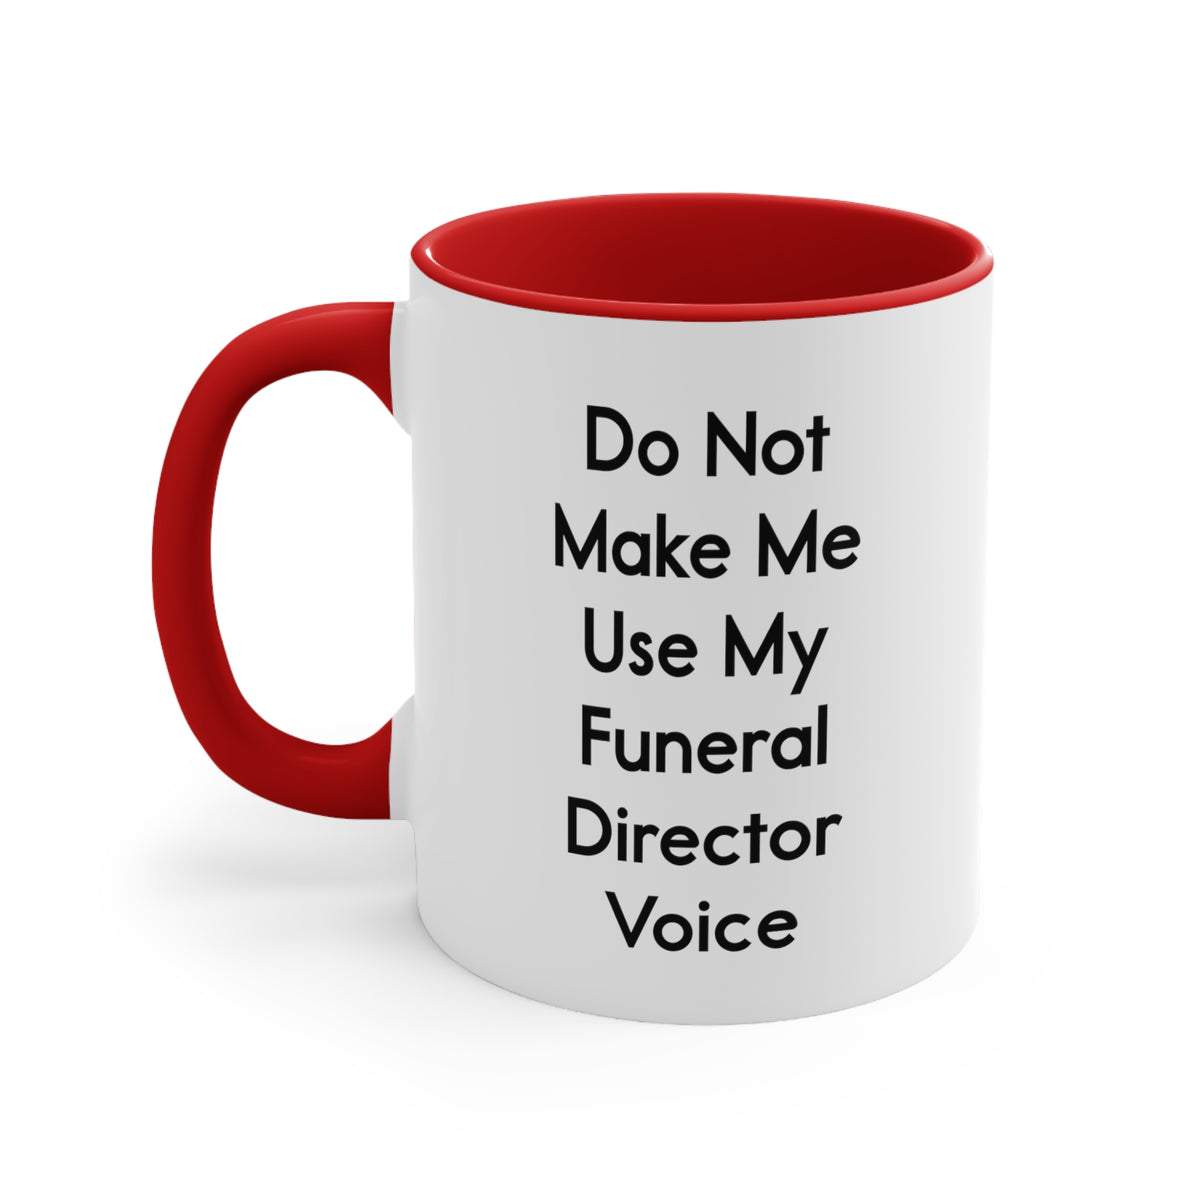 Birthday Unique Gifts - Funny Two Tone Coffee Mug - Do Not Make Me Use My Funeral Director Voice - Gifts from [Person] to Funeral Directors